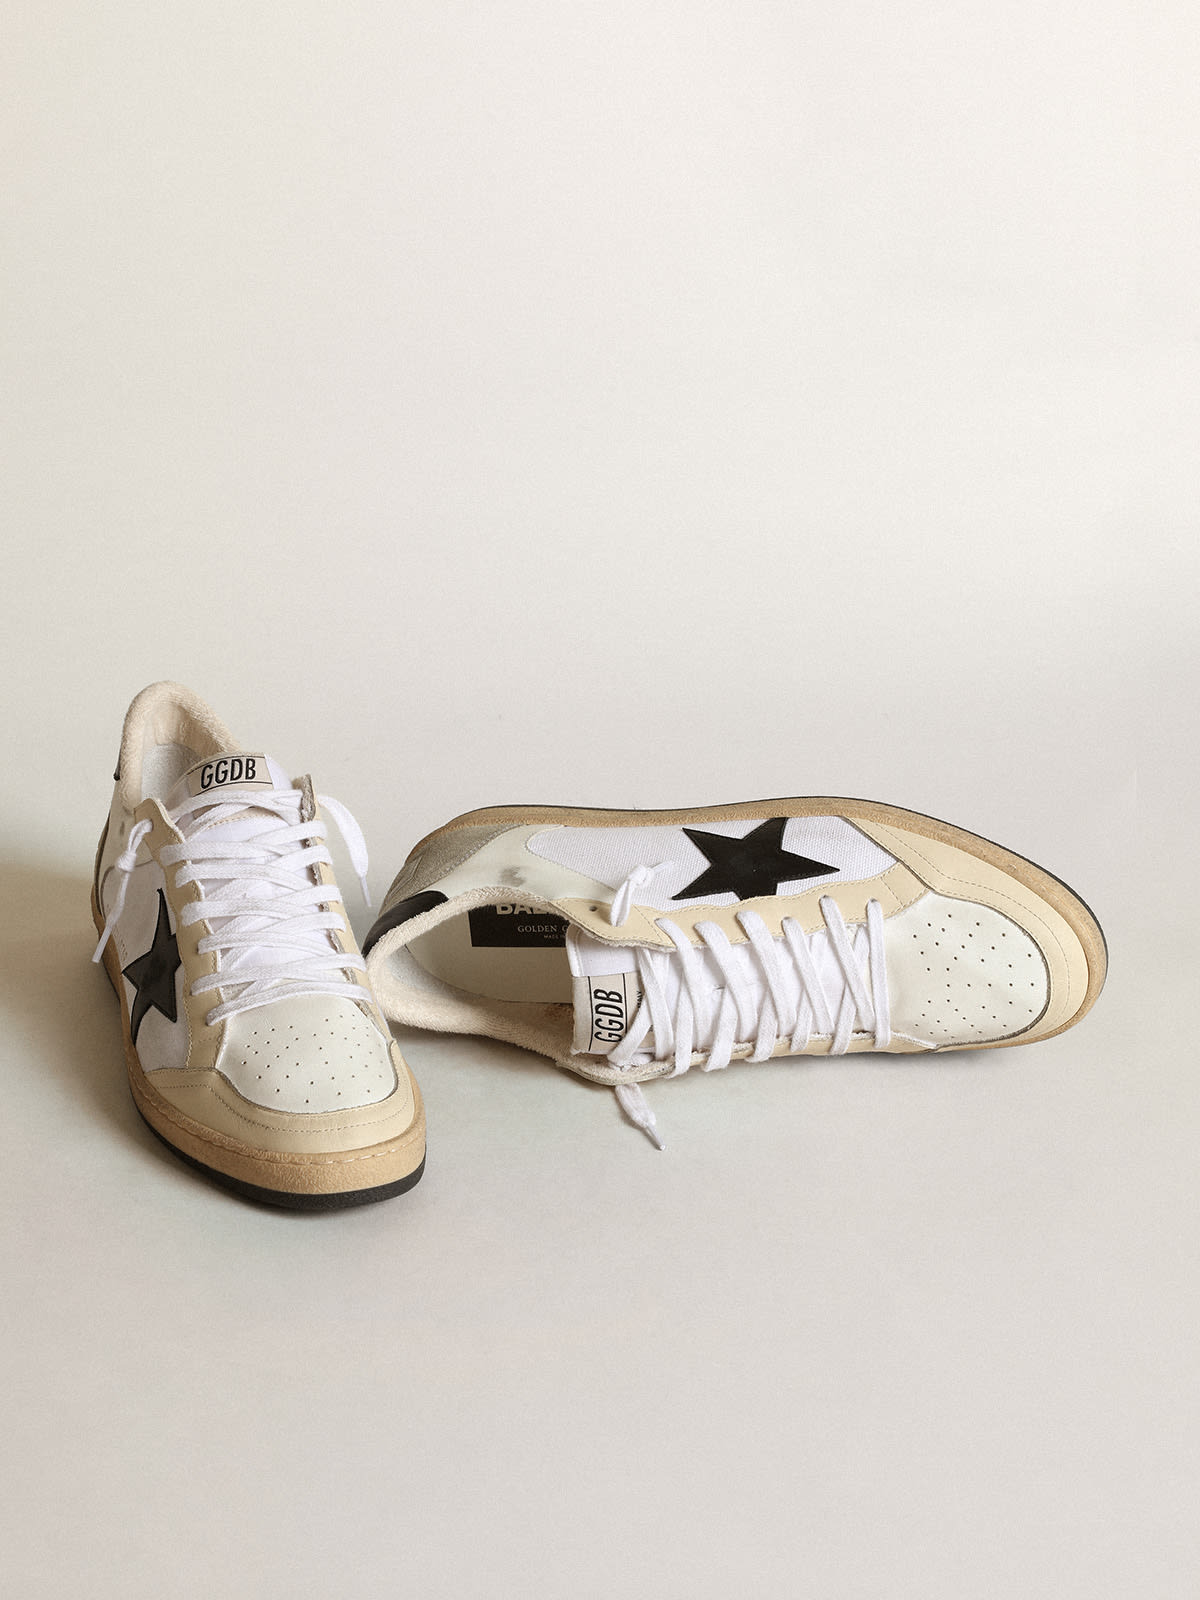 Golden Goose - Men’s Ball Star sneakers in white canvas and leather with ivory leather inserts and black nappa leather star in 